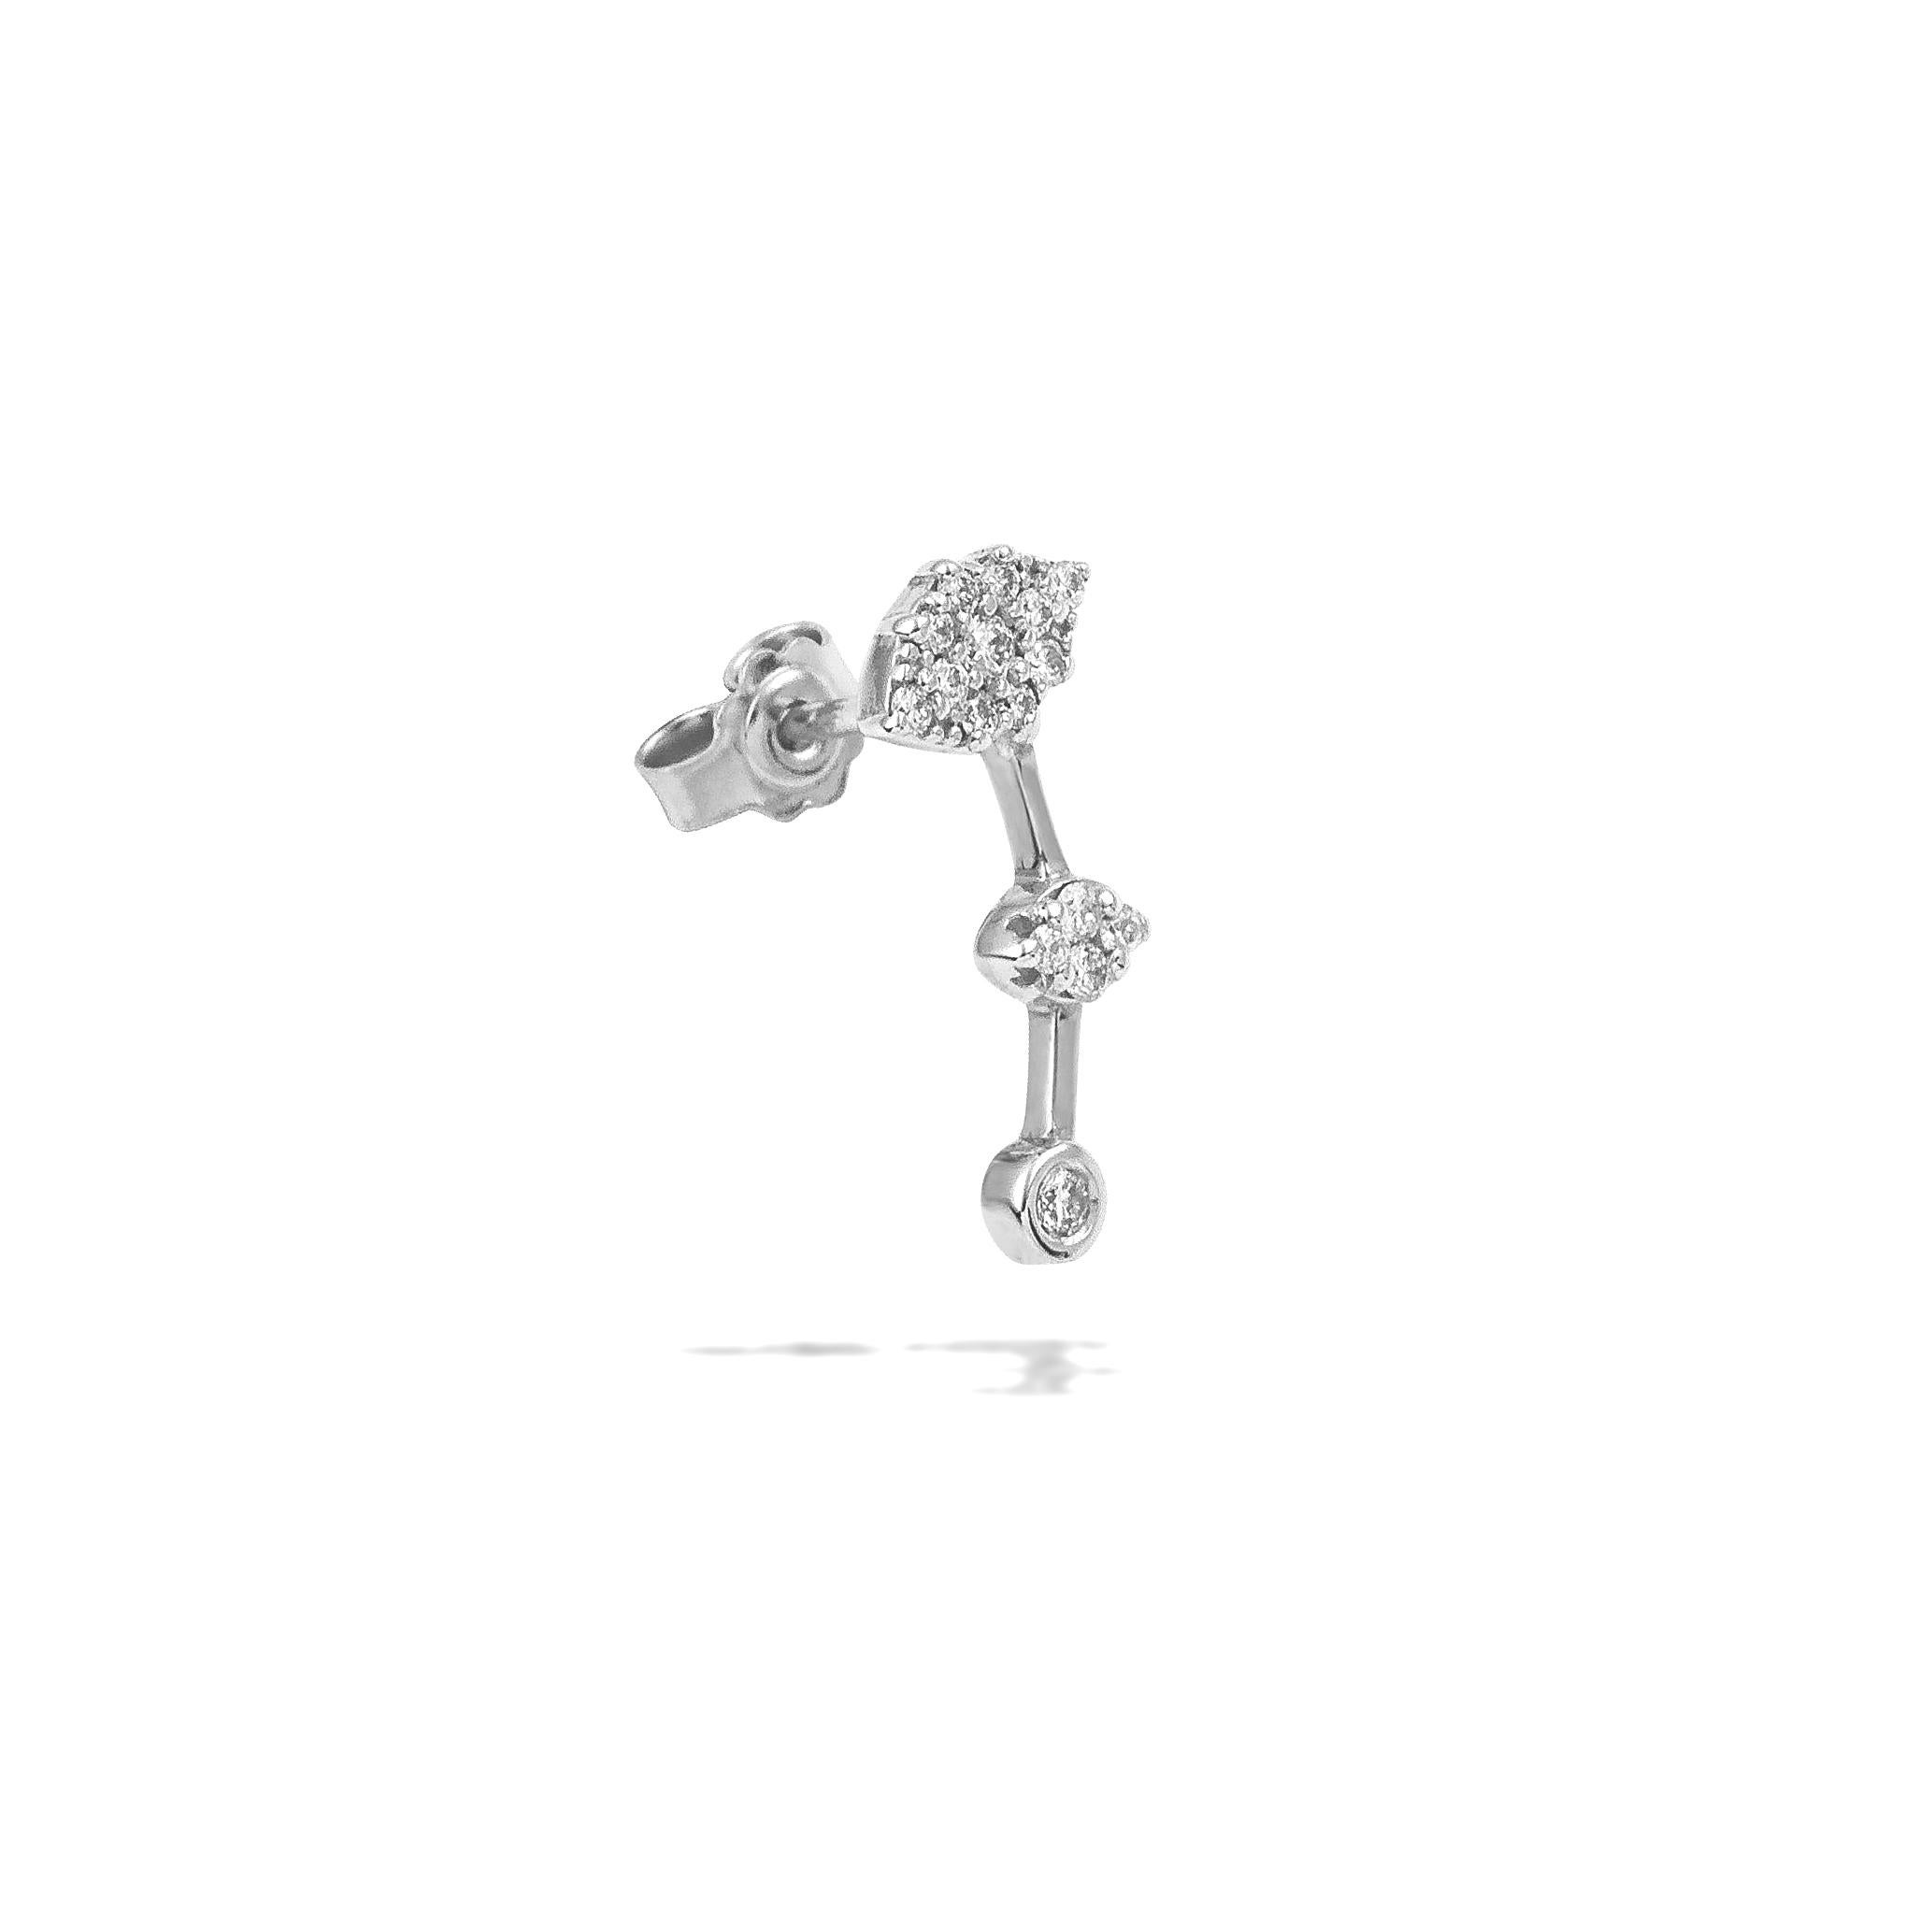 Recycled 14K White Gold

Diamonds Approx. 0.16 ct

Triple Mixed Diamond Earring Stud in White Gold and Diamonds.

This collection combines the simplicity of the single piece with the opulence of diamonds.

All jewels in the Essentials – Mix & Match